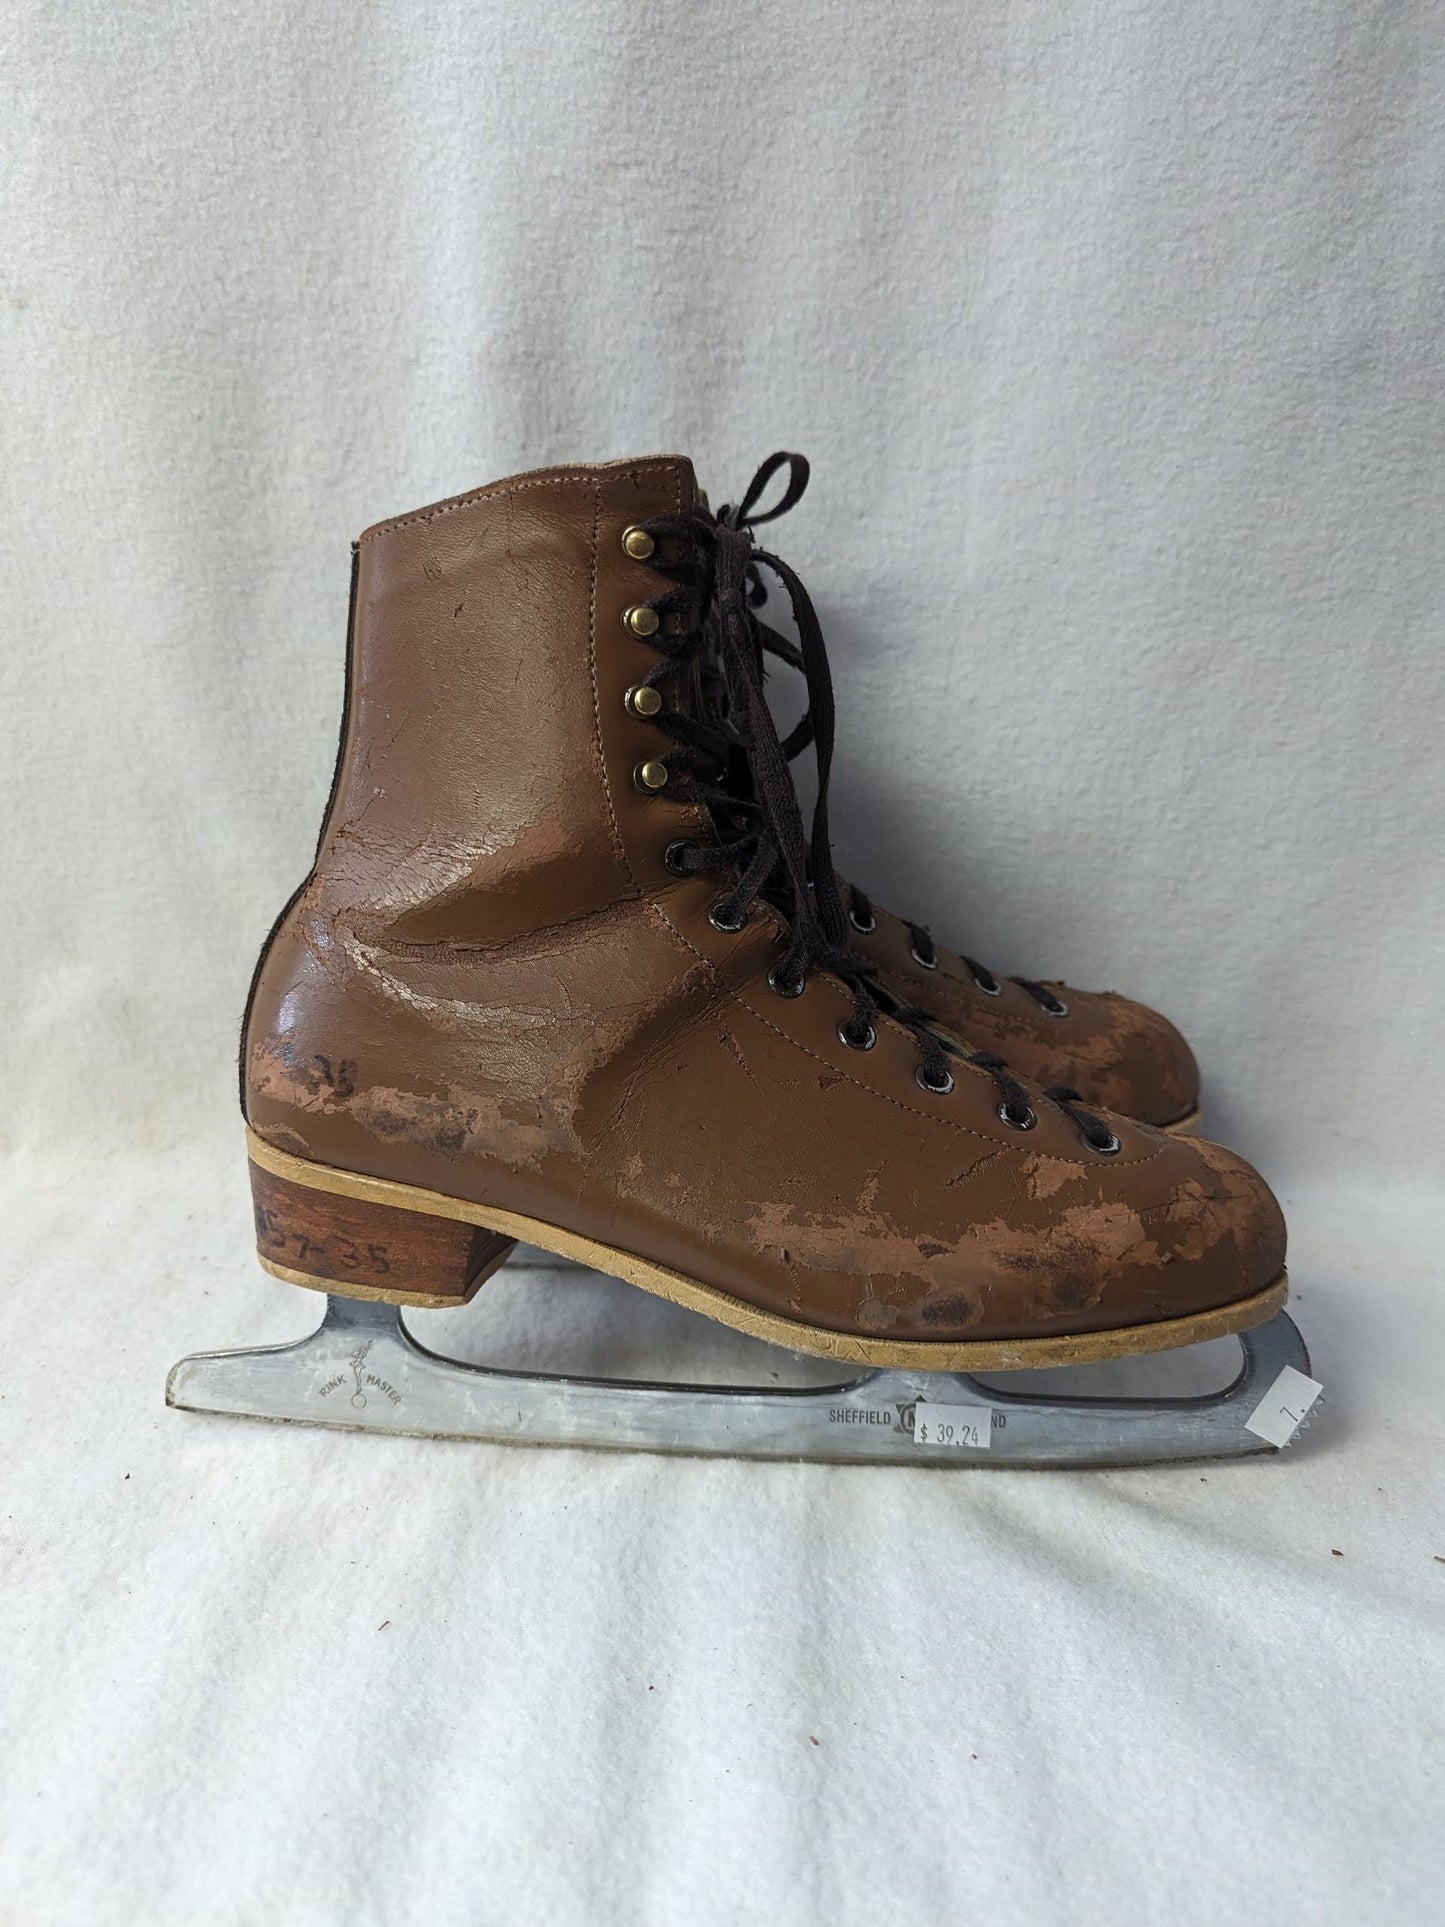 Rink Master Ice Skates Size 7 Color Brown Condition Used